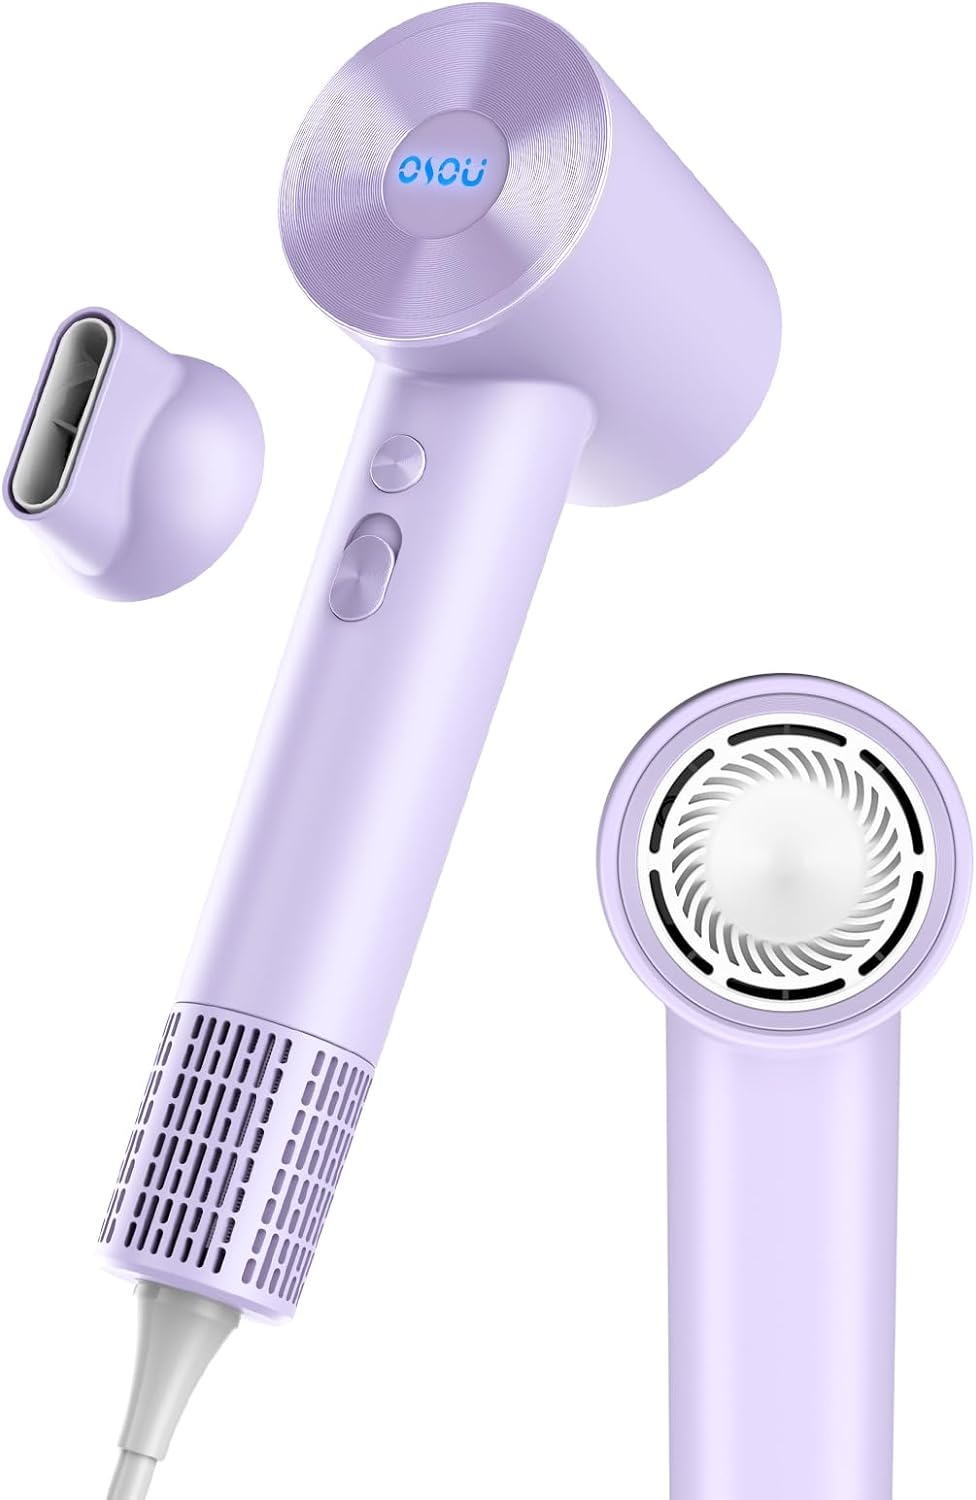 The OSOU Negative Ionic Hair Dryer exceeded my expectations with its powerful 1200W motor and impressive 110,000 RPM high-speed performance. Its lightweight design and 360 rotating nozzle make it perfect for both travel and home use. The low noise level is a standout feature, ensuring a pleasant drying experience. The elegant purple color adds a stylish touch. Overall, a fantastic hair dryer that delivers fast drying results and convenience.